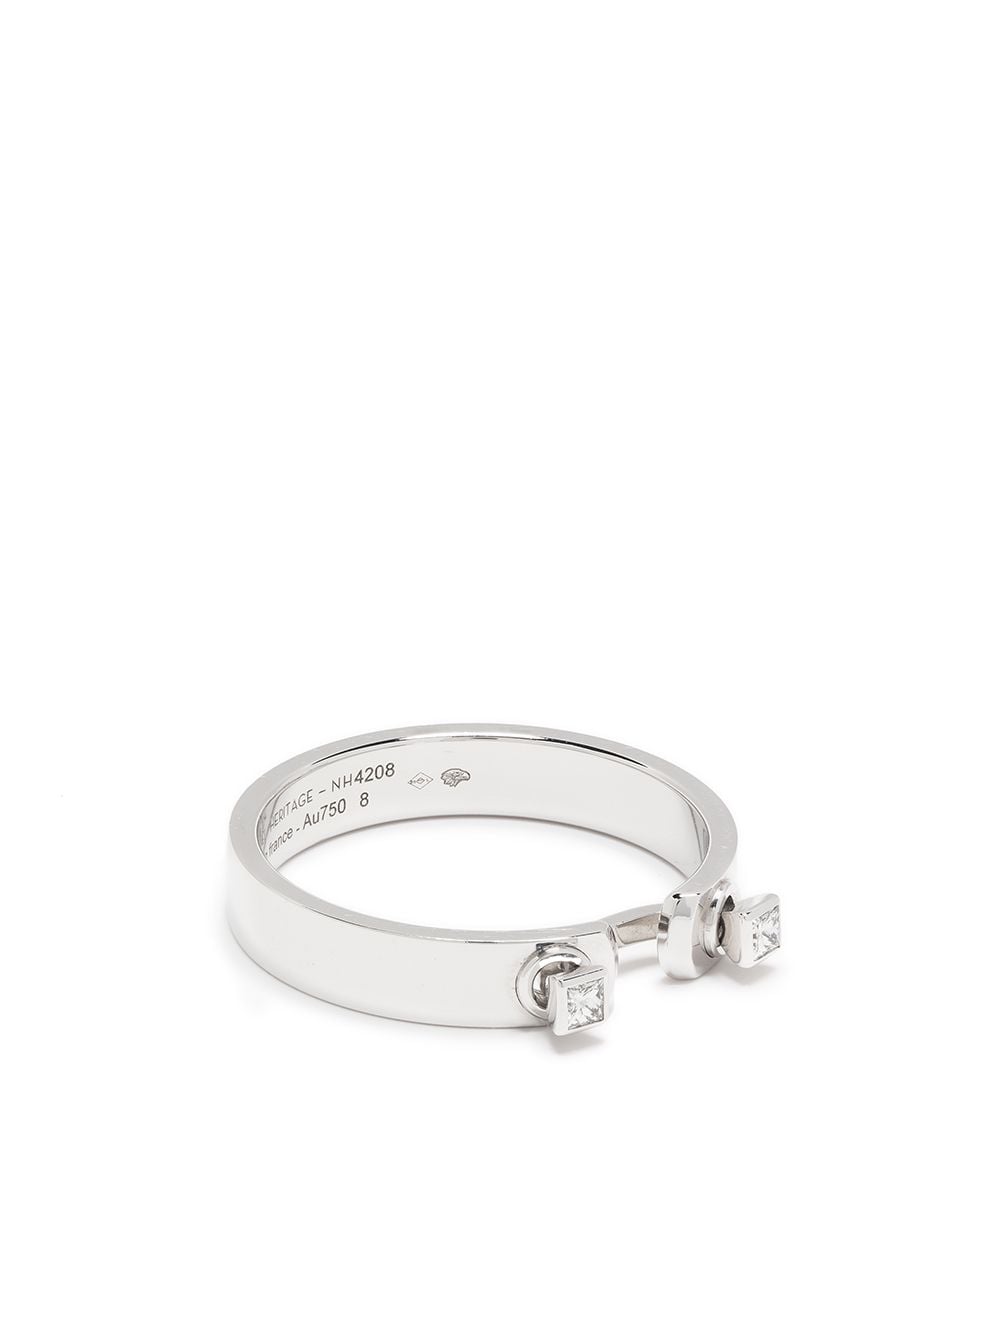 Nouvel Heritage 18kt White Gold Dinner Date Mood Diamond Ring - Farfetch